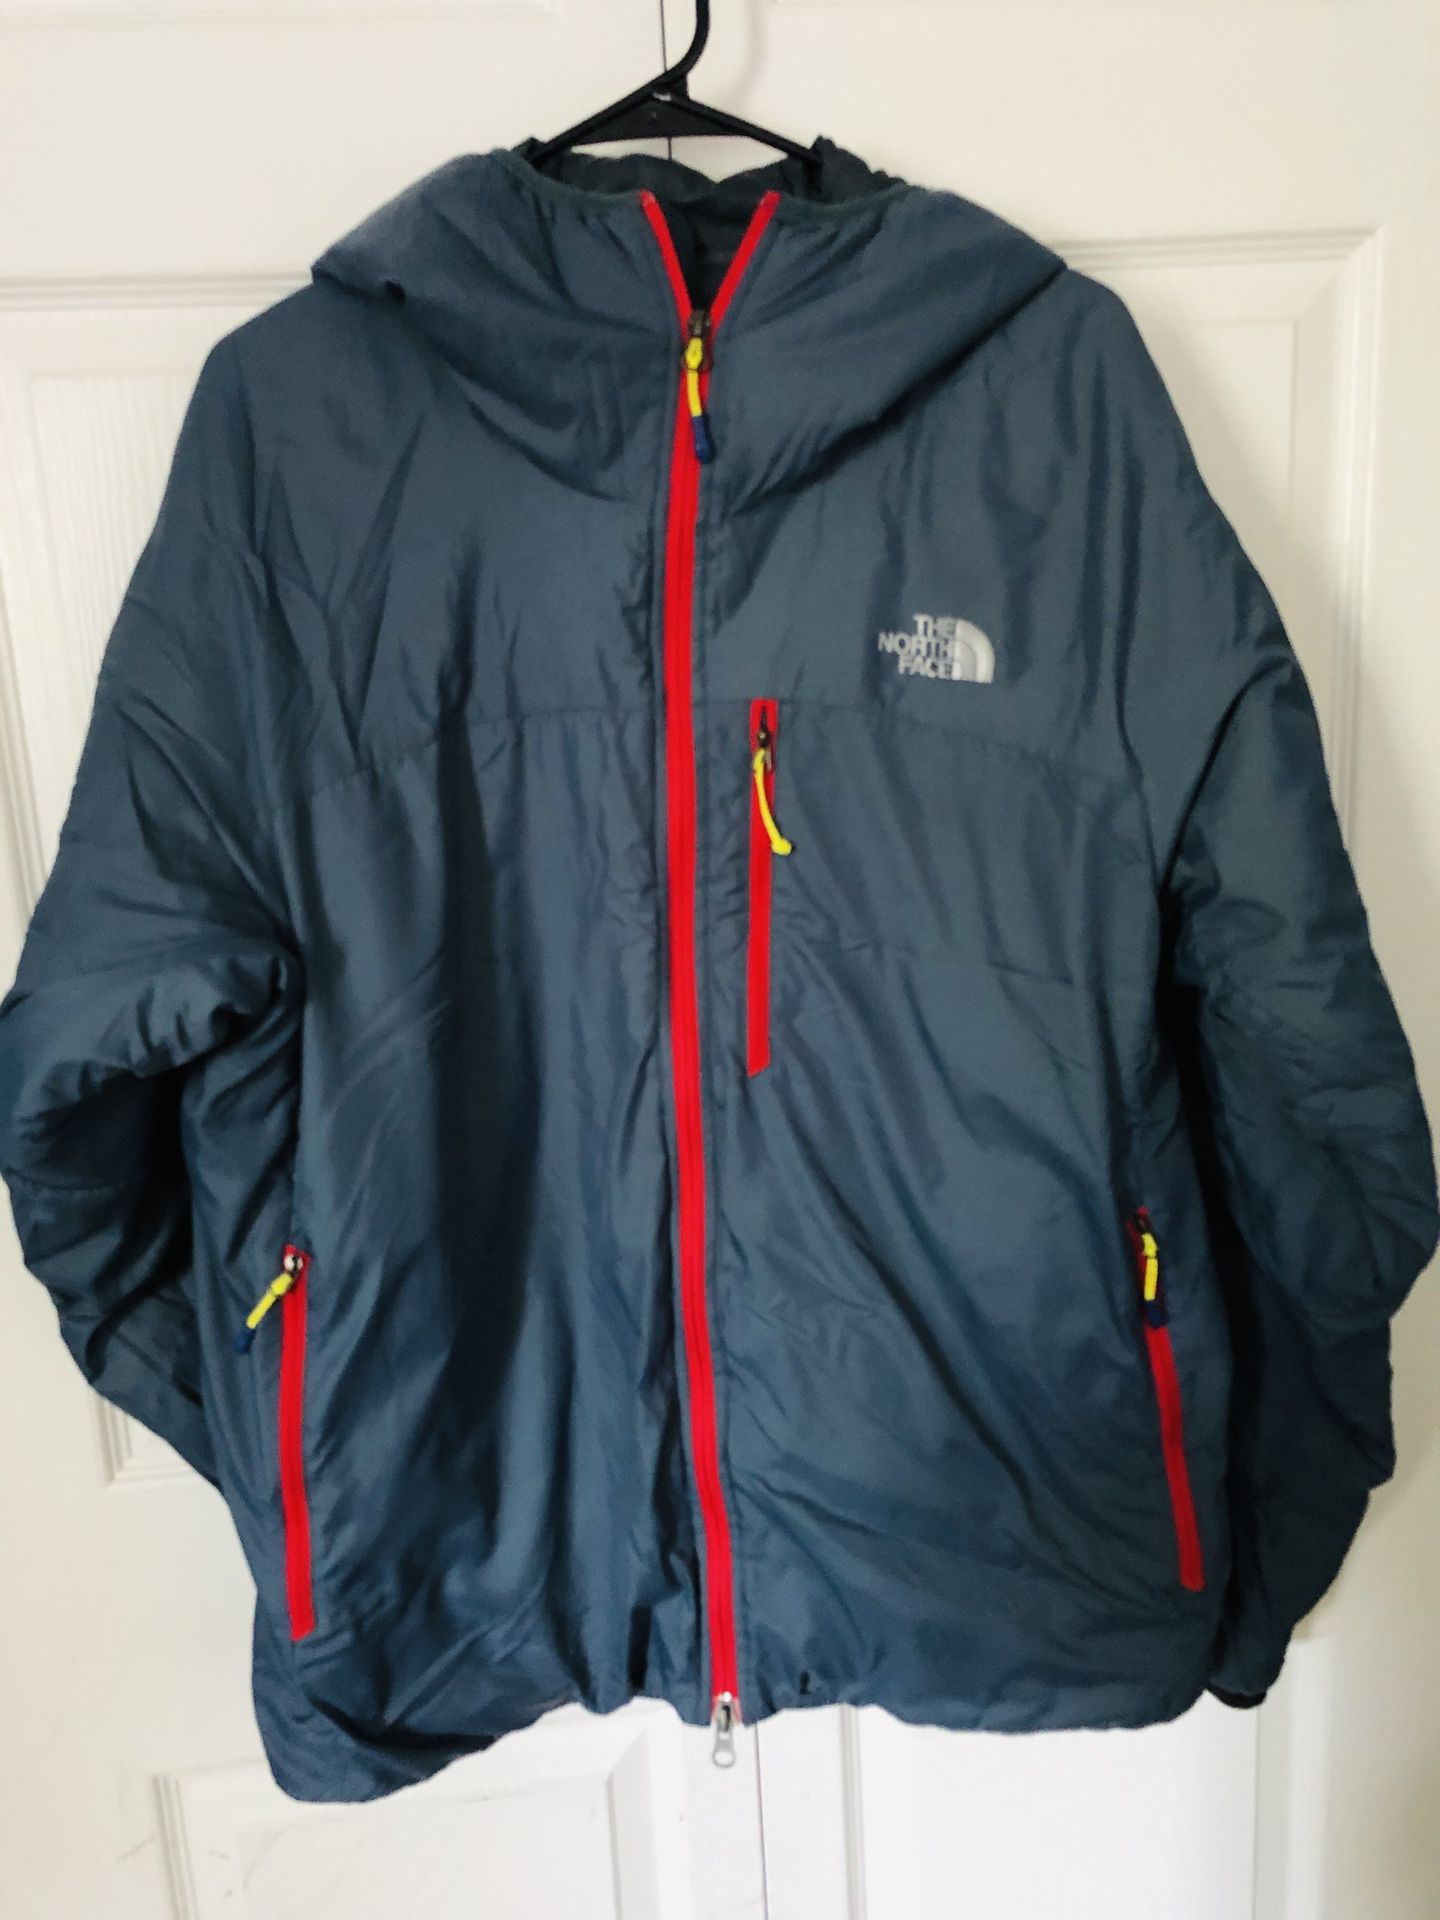 The North Face Summit Series Jacket Men's Size Large in excellent condition from pet and smoke free home (pick up only)